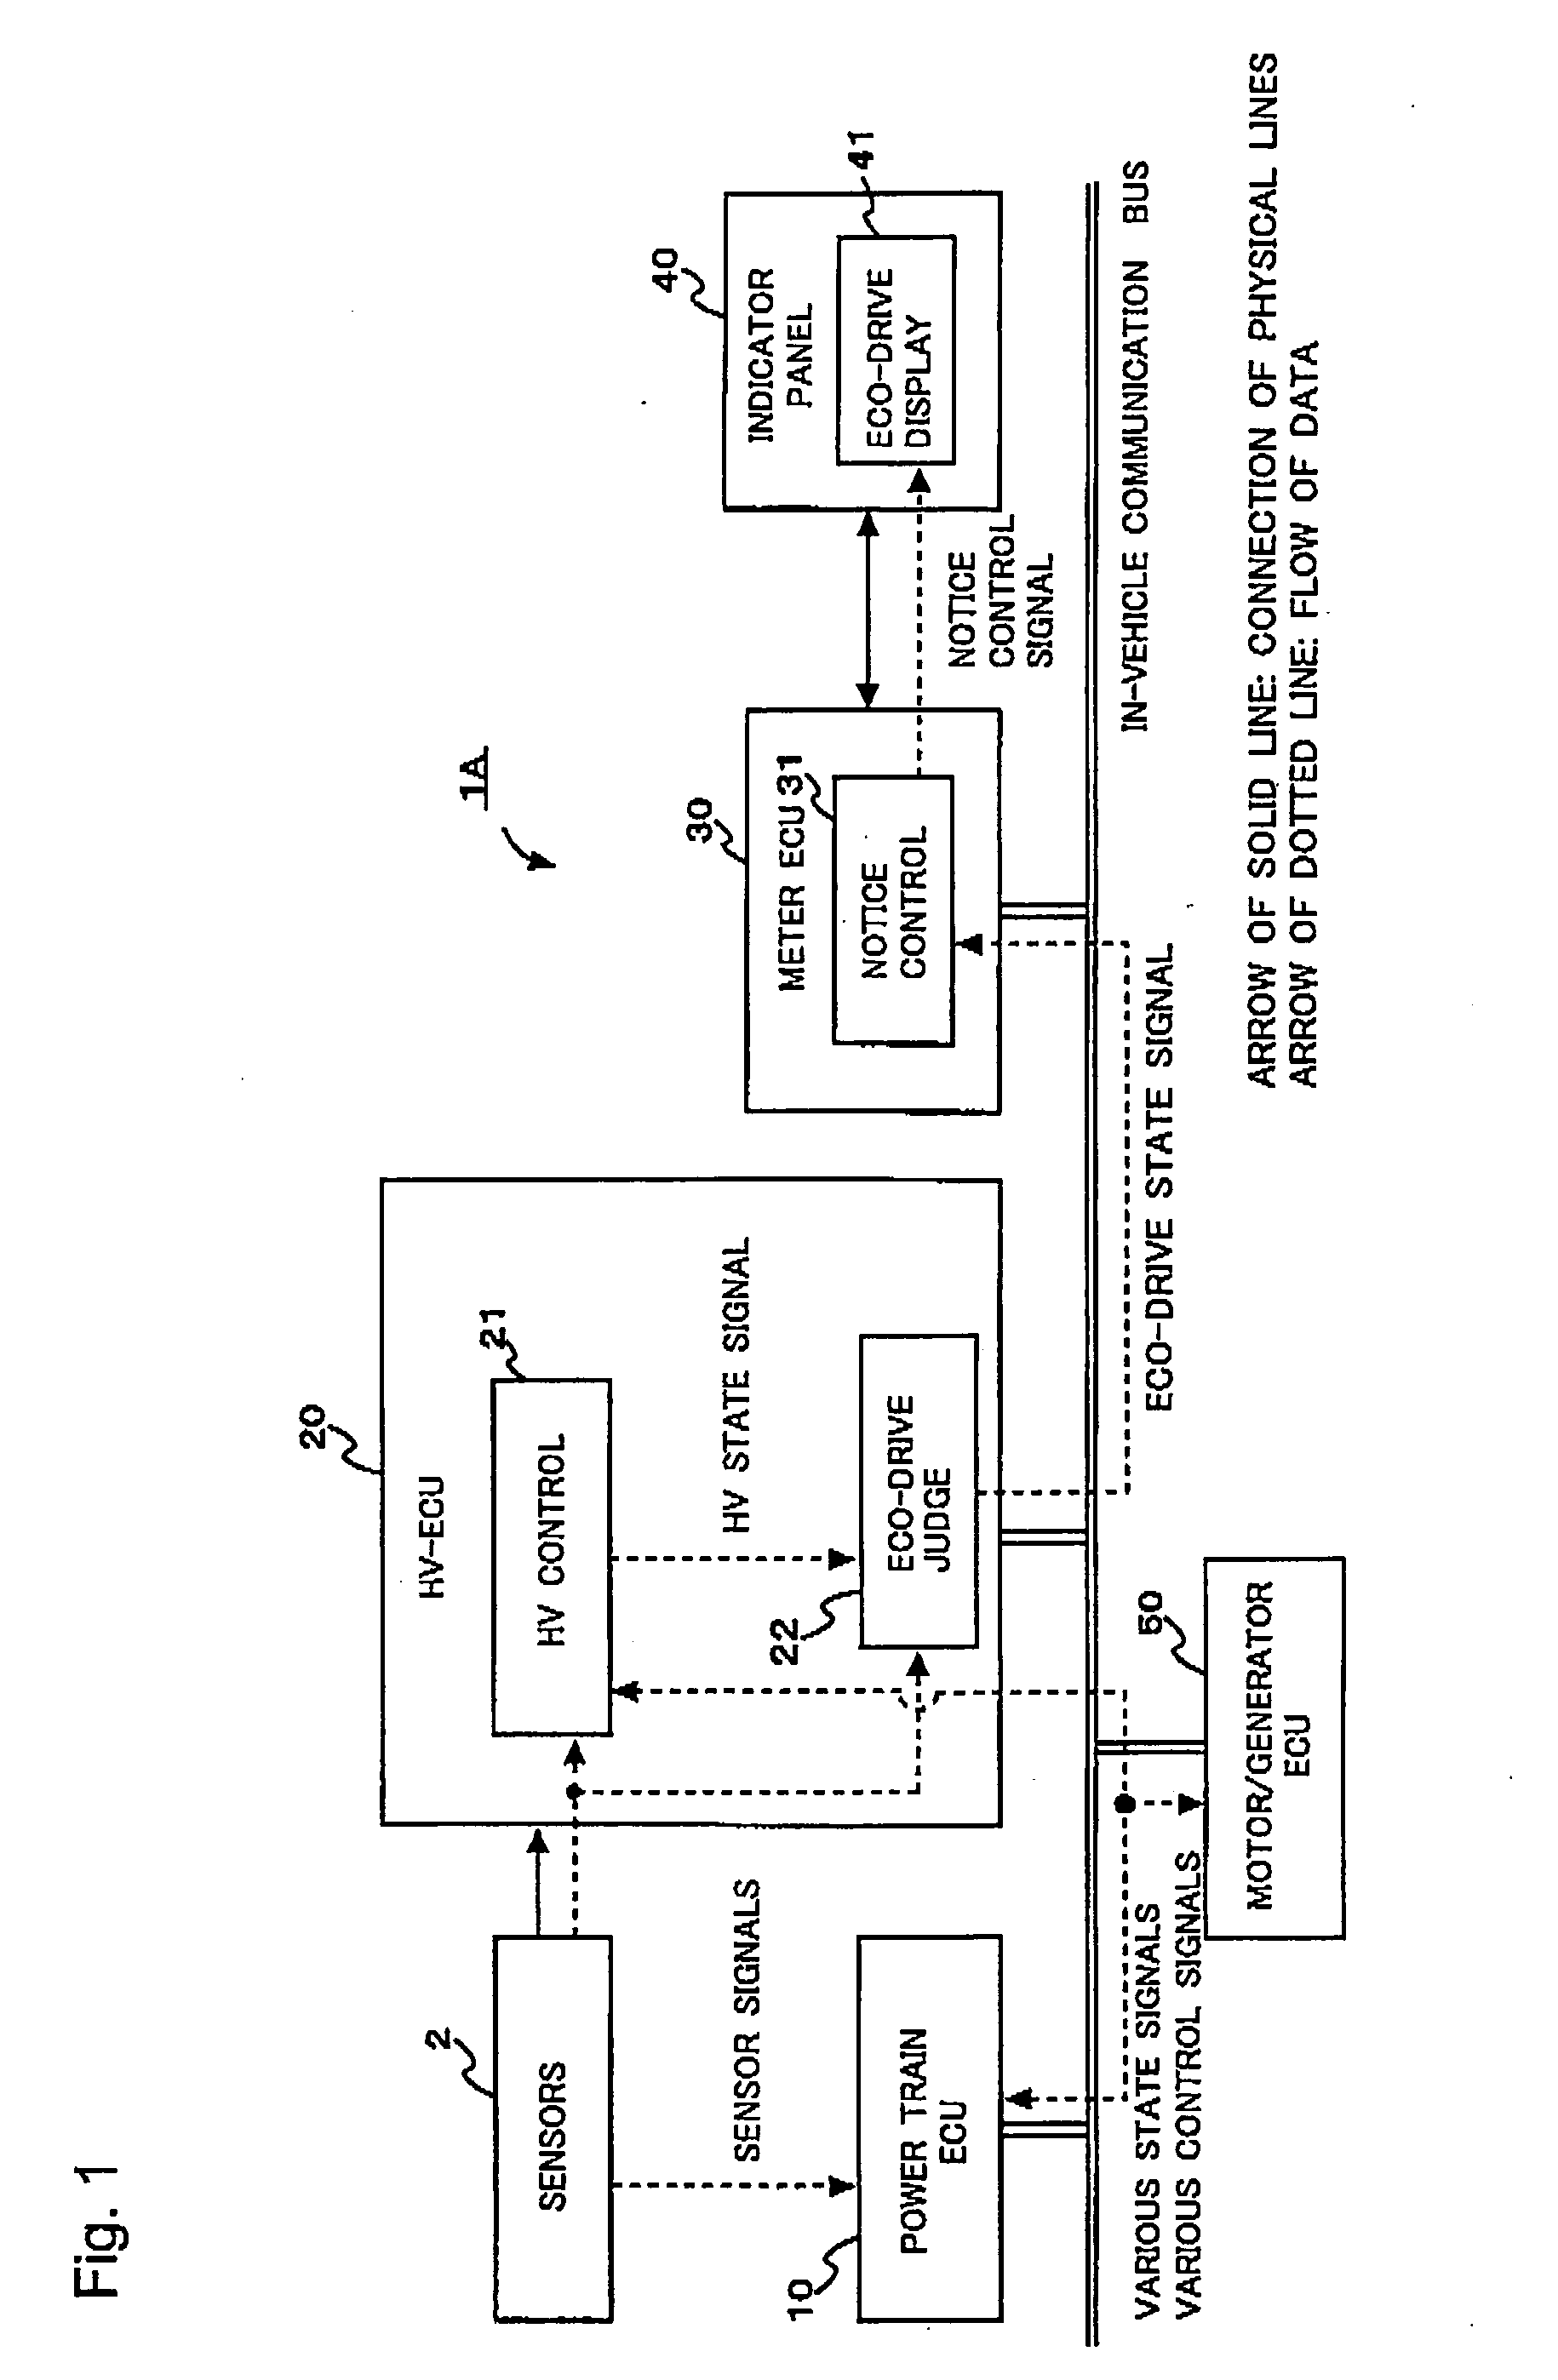 Eco-drive assist apparatus and method